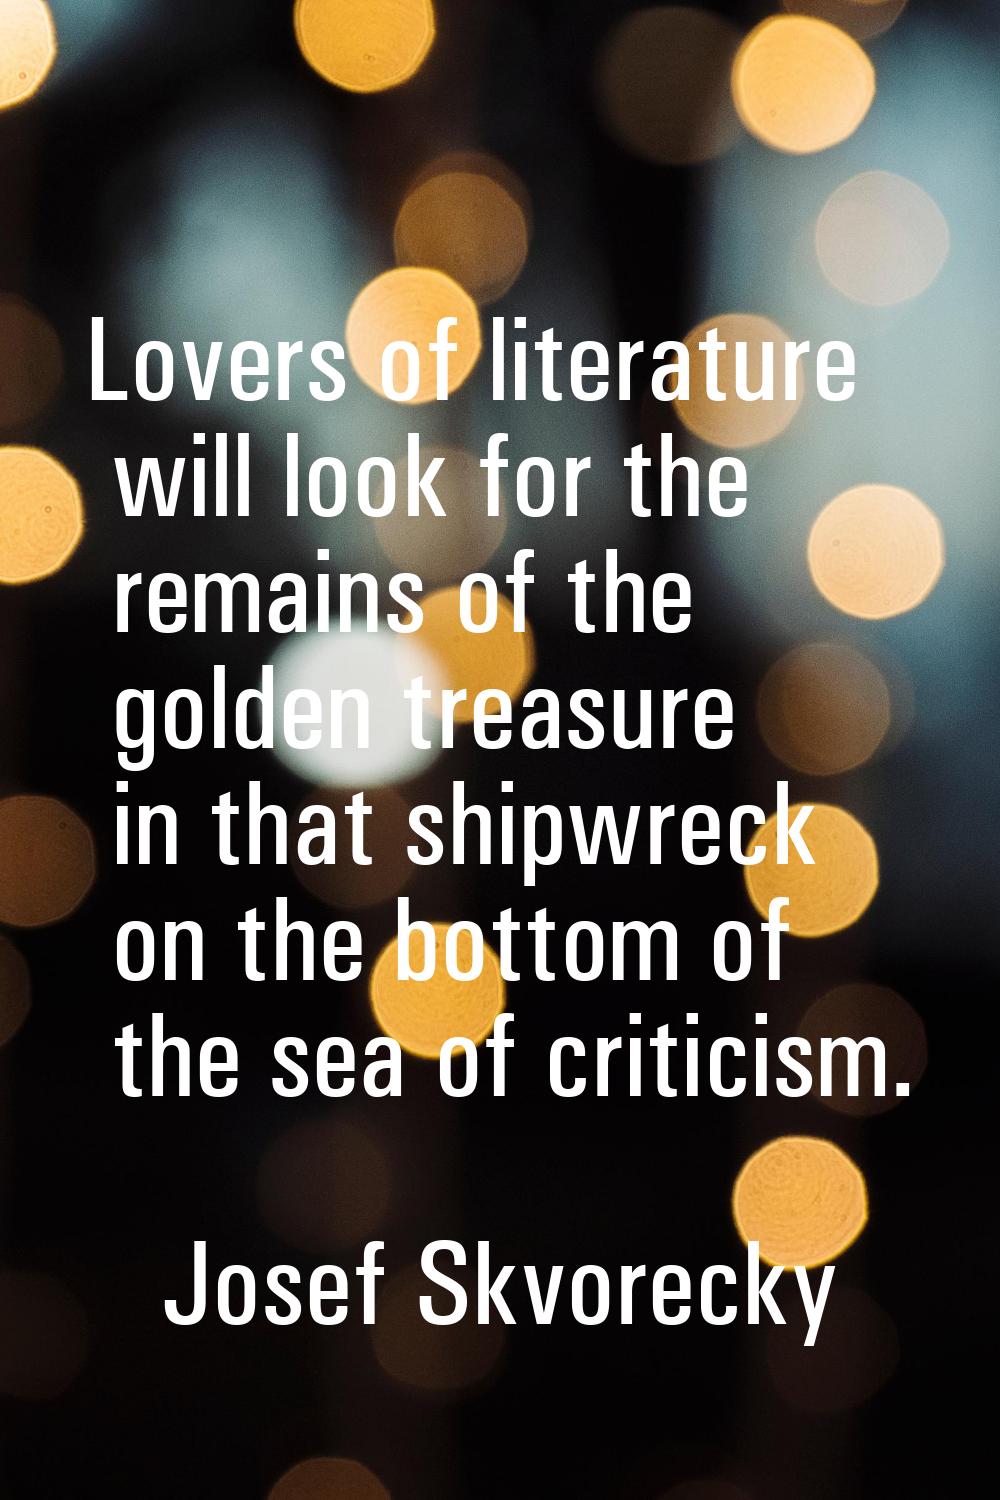 Lovers of literature will look for the remains of the golden treasure in that shipwreck on the bott